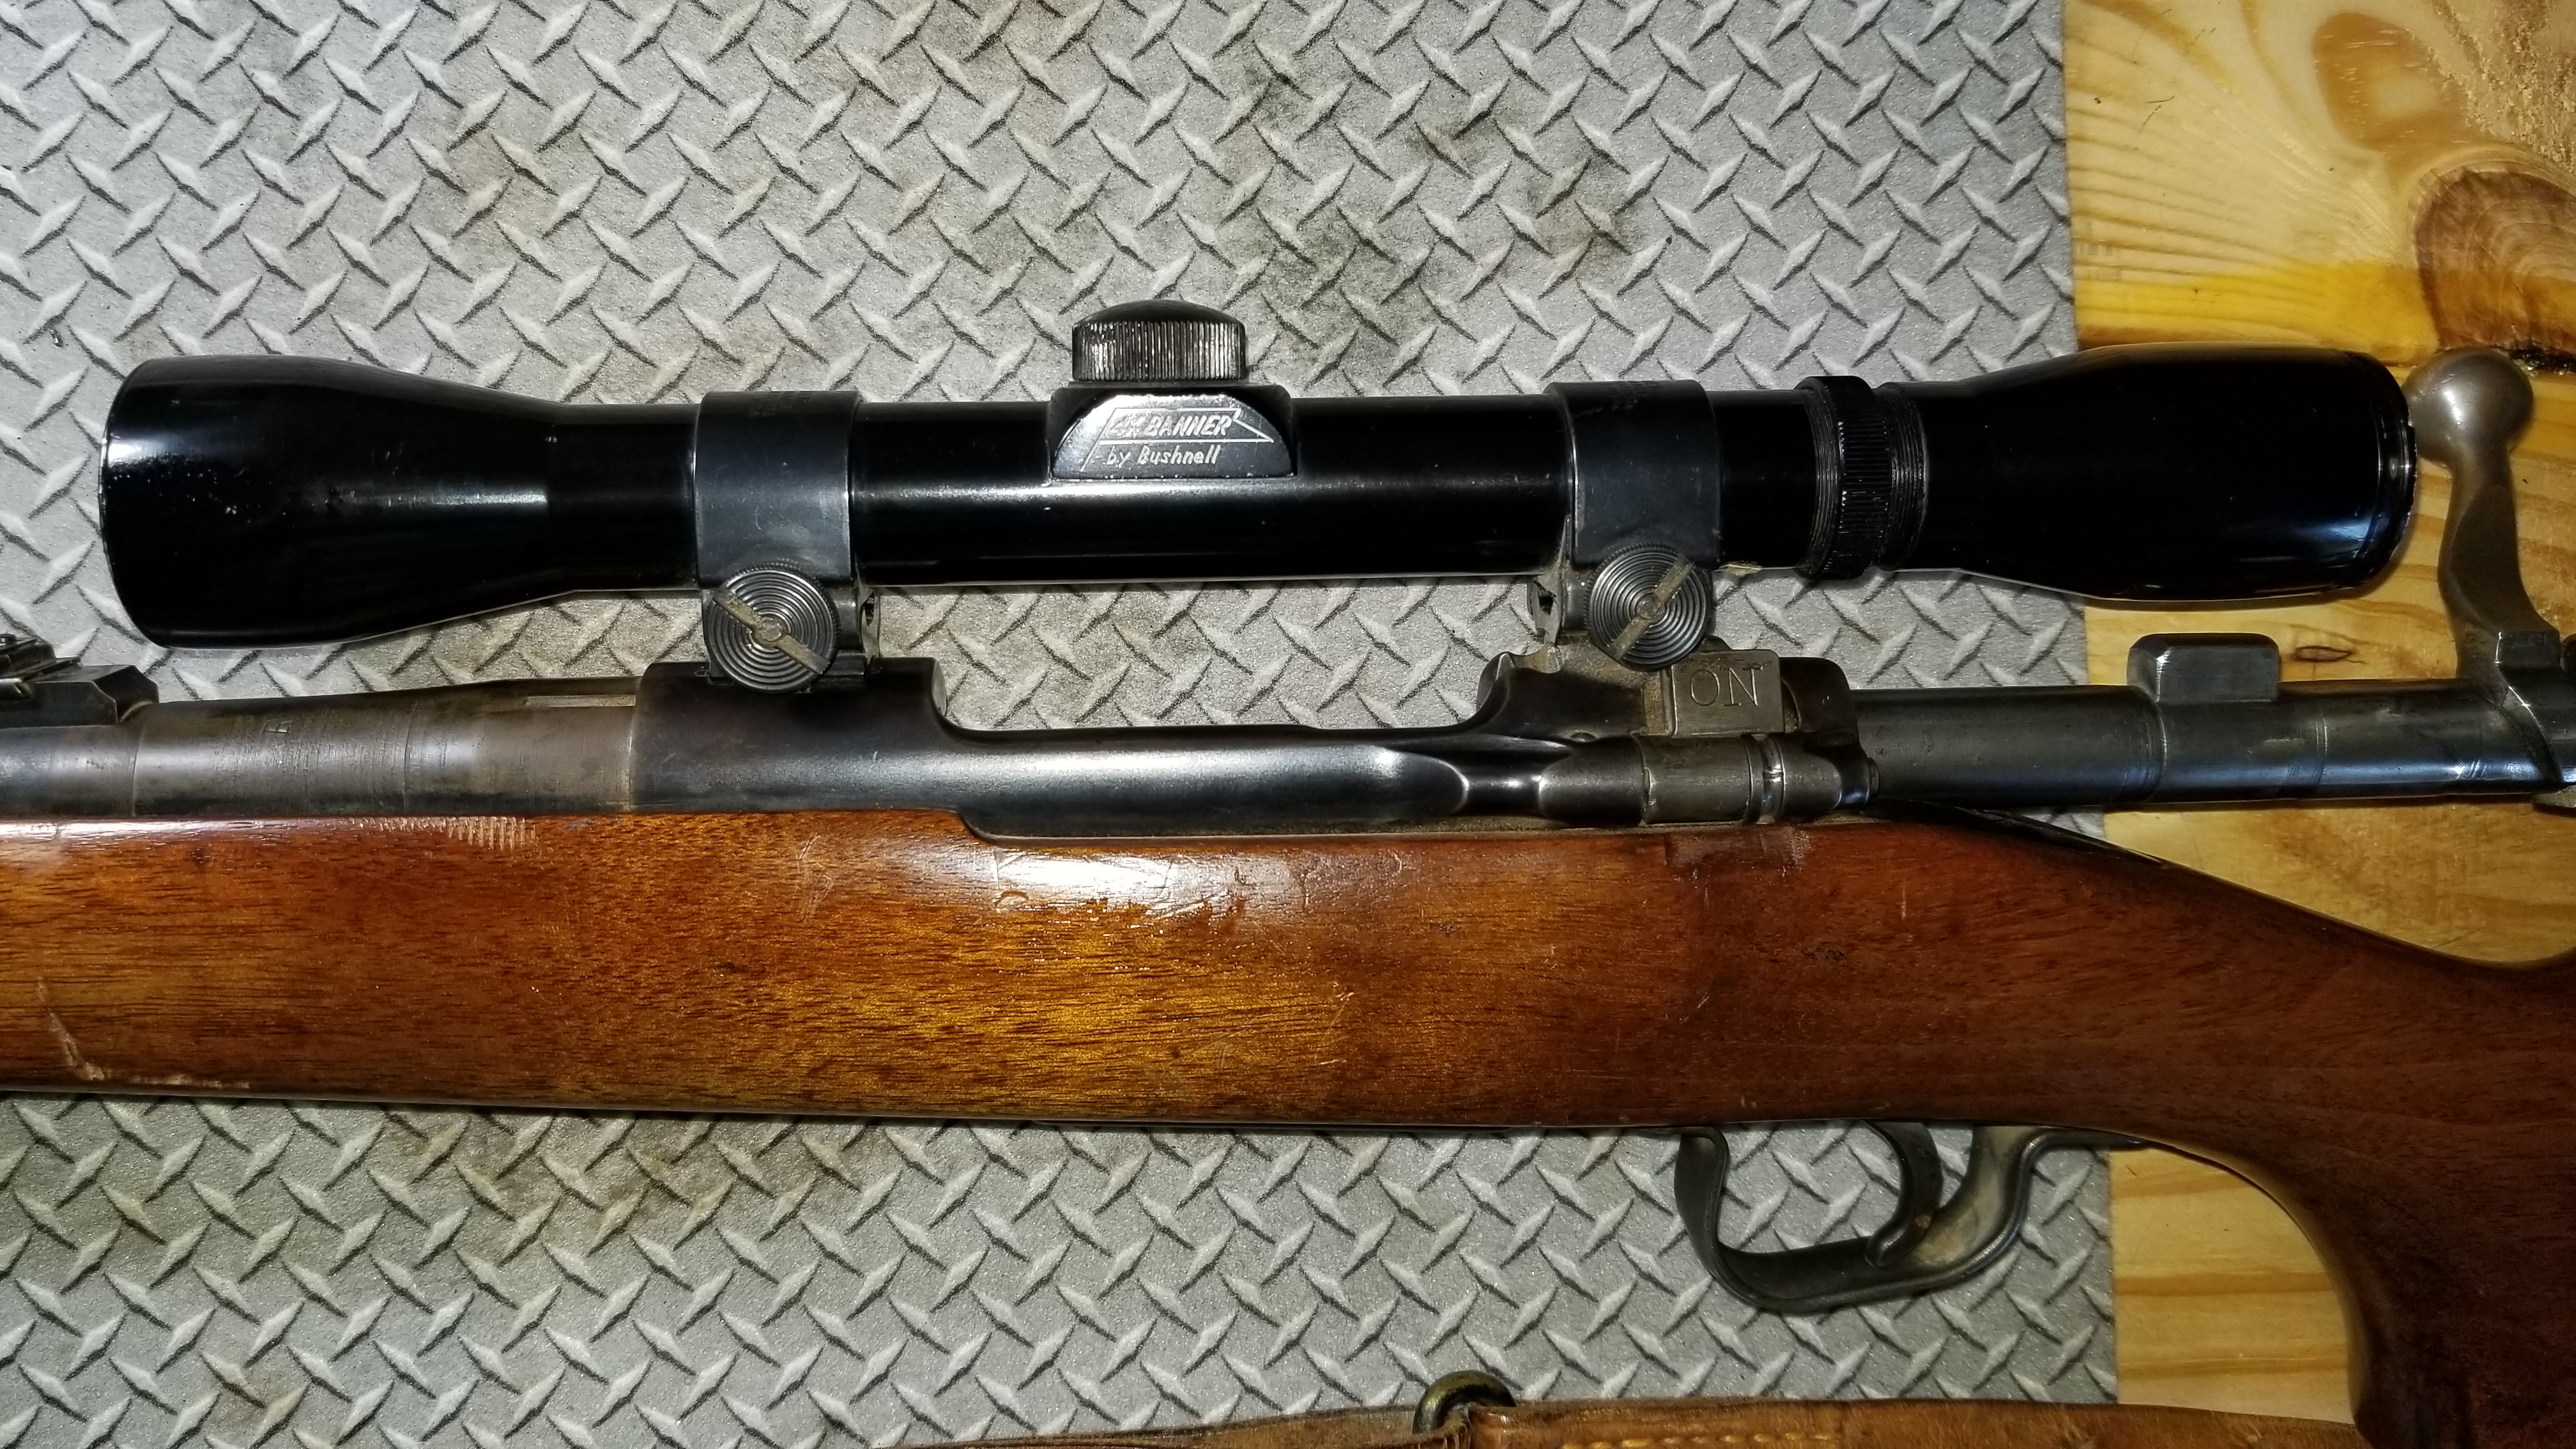 1903 Springfield with 4x Banner by Bushnell Scope